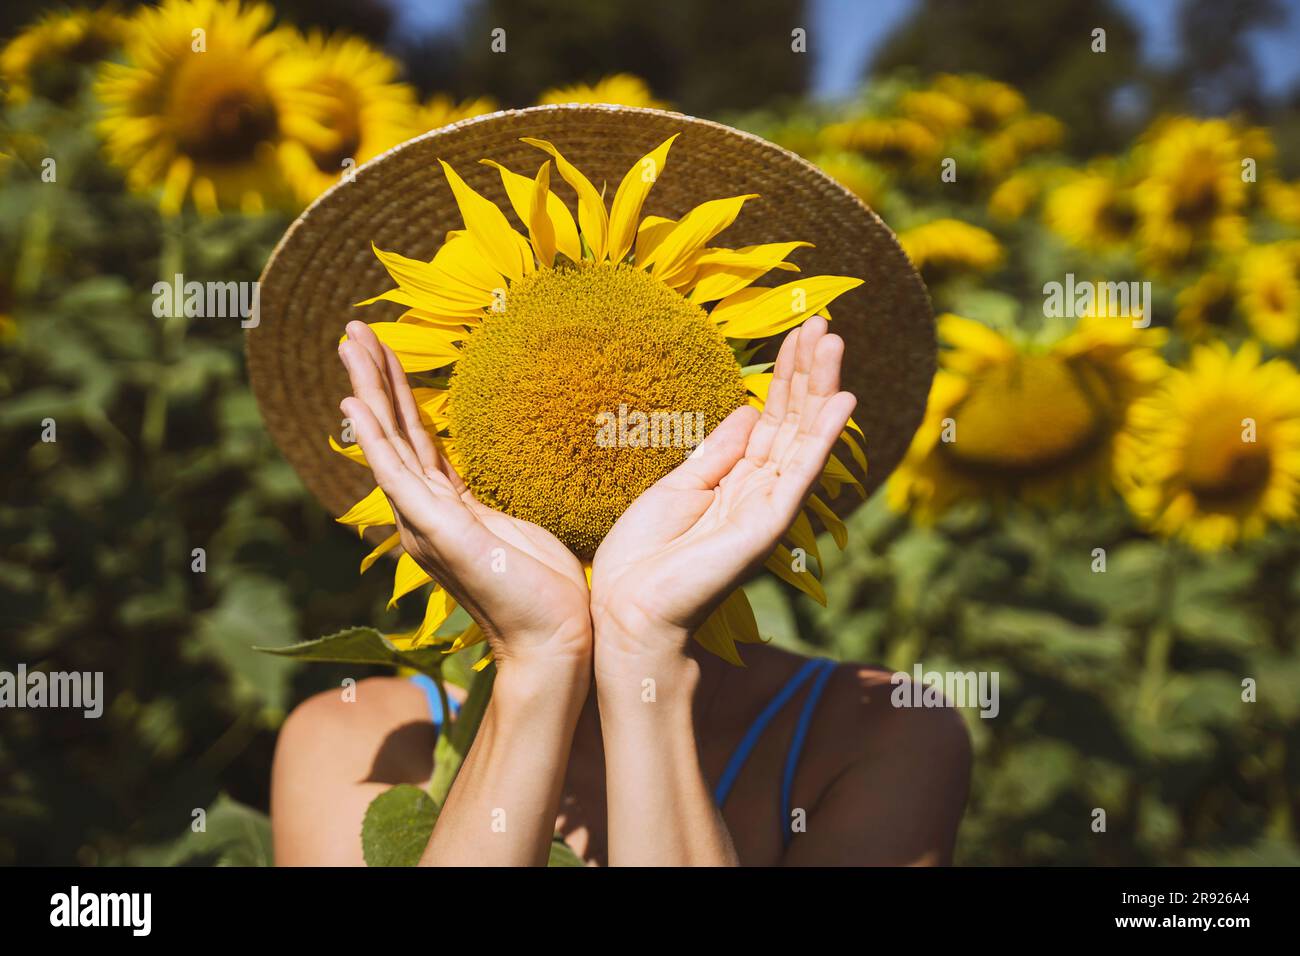 Playful woman covering face with sunflower Stock Photo